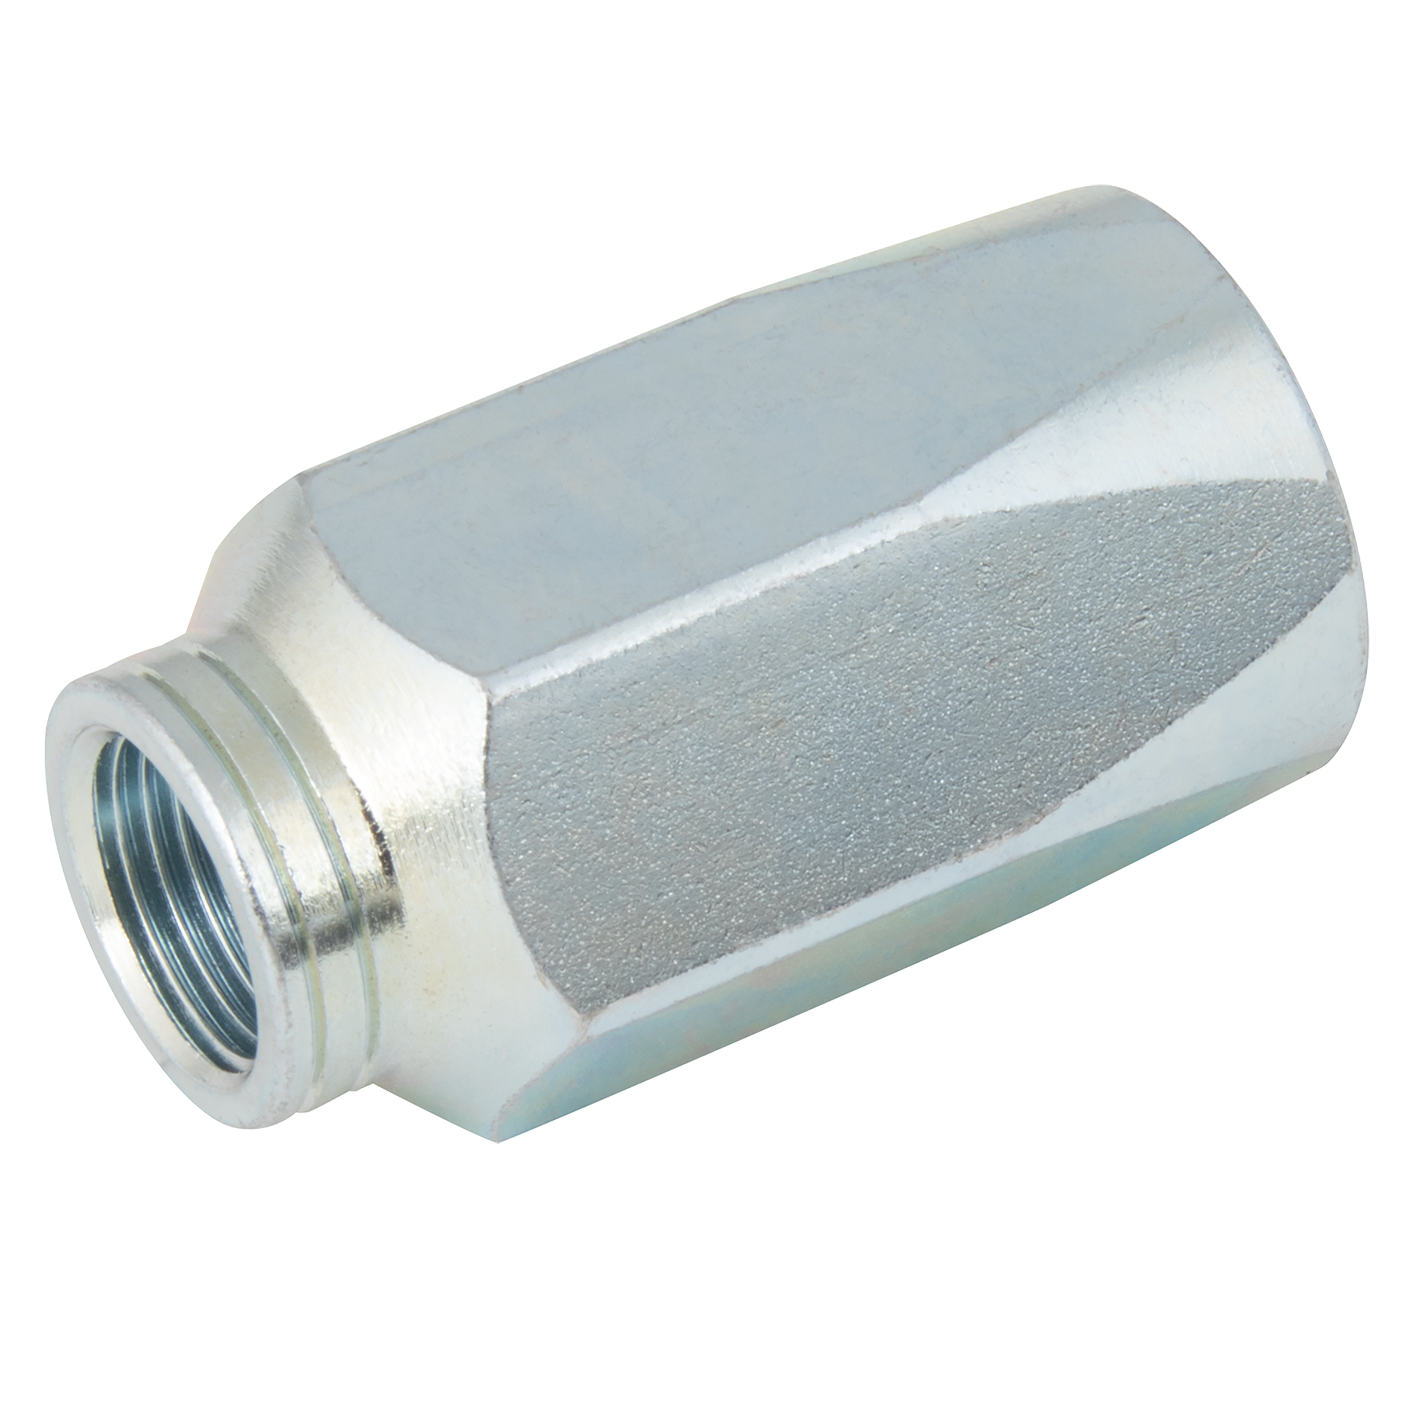 Hydraulic Reusable Ferrule R2AT Non-skive Hose ID 5/8"